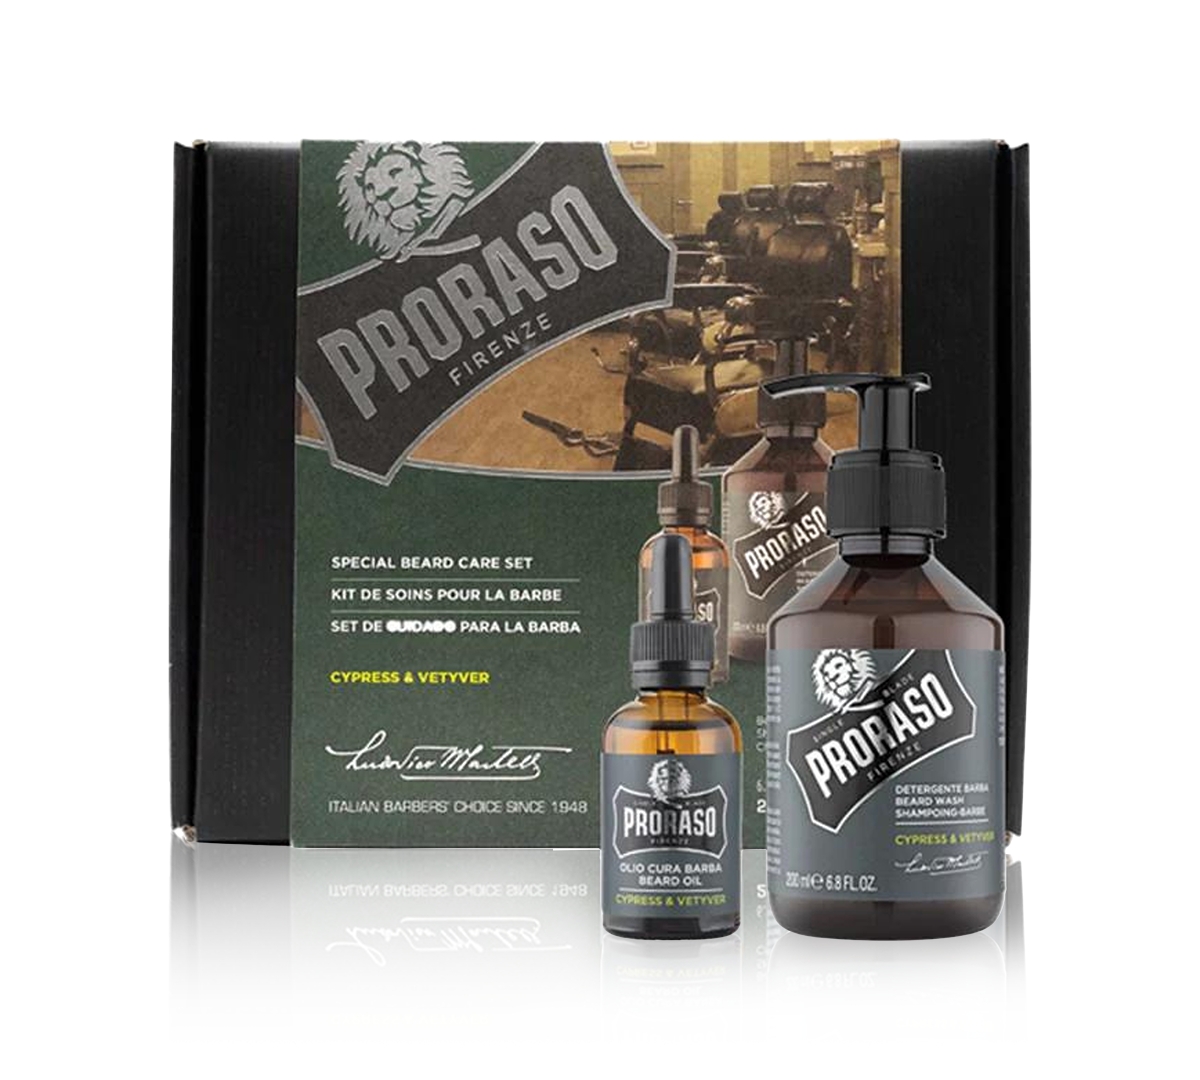 Proraso 2-pc. Beard Care Set For Full Or Long Beards - Cypress & Vetyver Scent